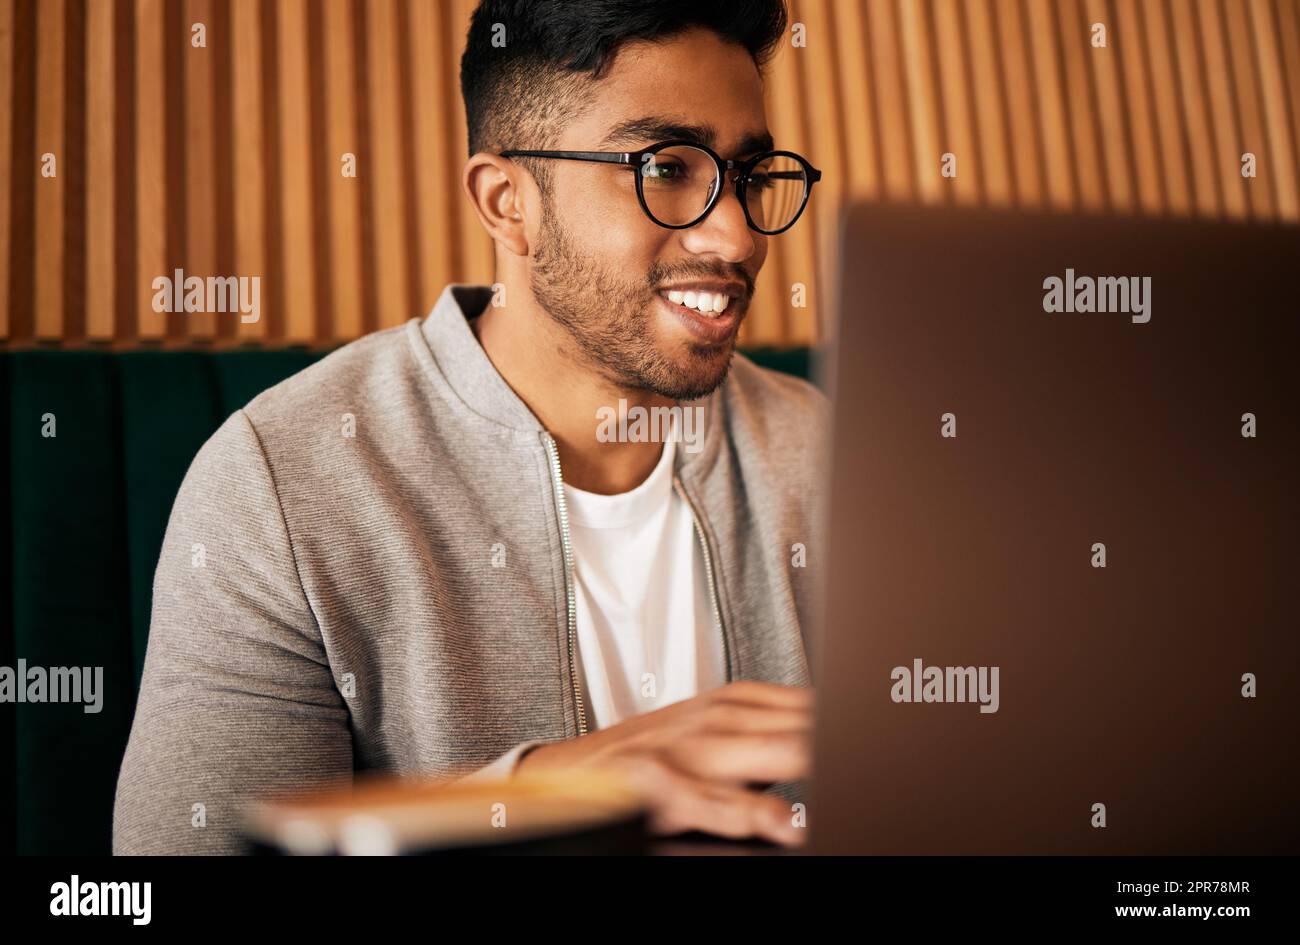 .. Handsome indian man with glasses sitting alone and using laptop in cafe. Man using wifi to browse the internet or doing freelance work in a cafe. Male student doing research on internet. Stock Photo